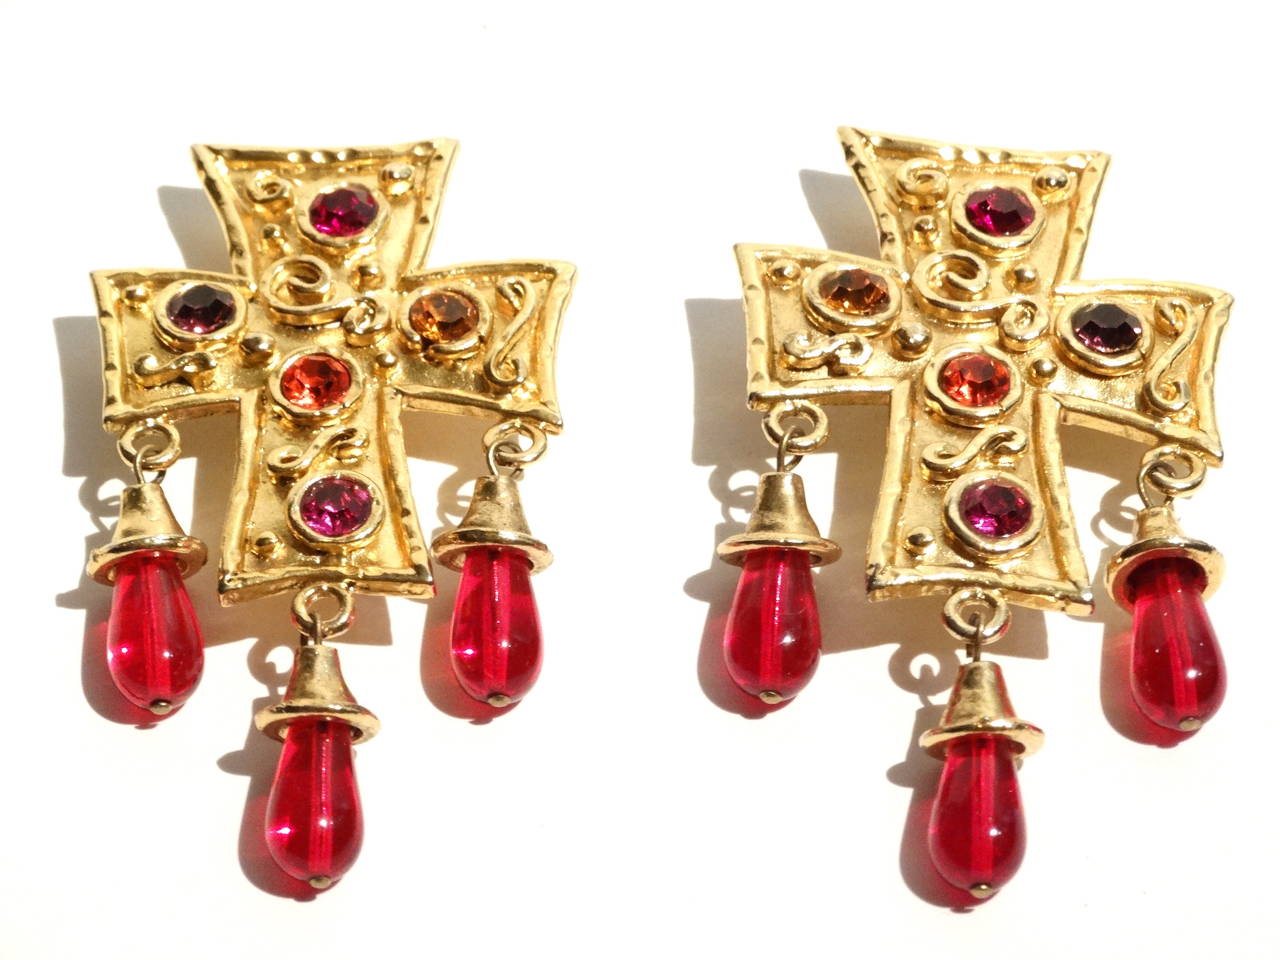 RARE Vintage Earrings SIGNED EDOUARD RAMBAUD PARIS Huge Cross Chunky Runway Faux Clips with Colored Rhinestones and 3 Red Glass Drops on each Earring. Plated Gold, Light in weight. 

Measurements 

Length  3